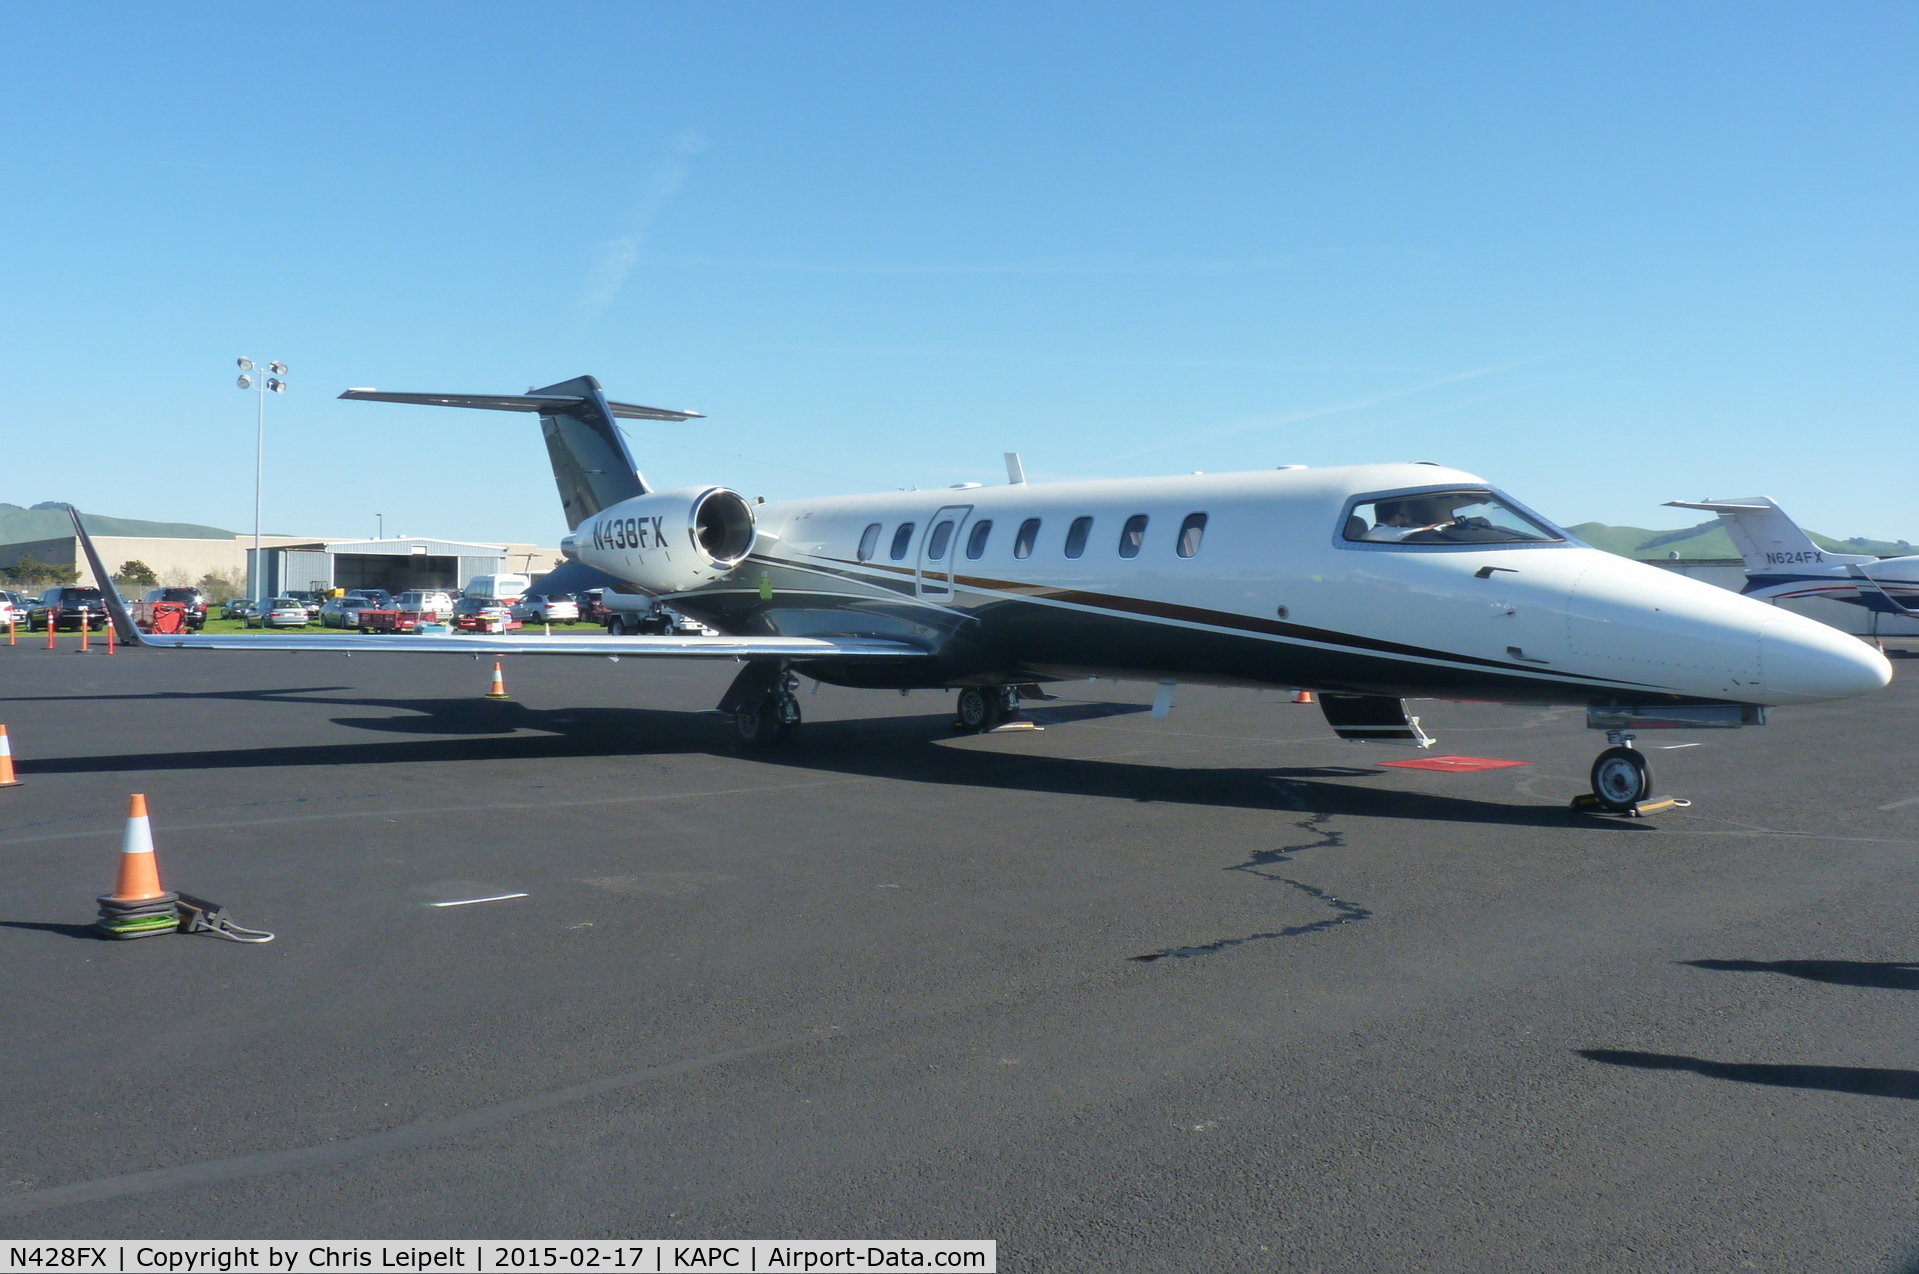 N428FX, 2001 Learjet 45 C/N 164, A 2001 LearJet 45 just after landing at Napa Airport, CA.